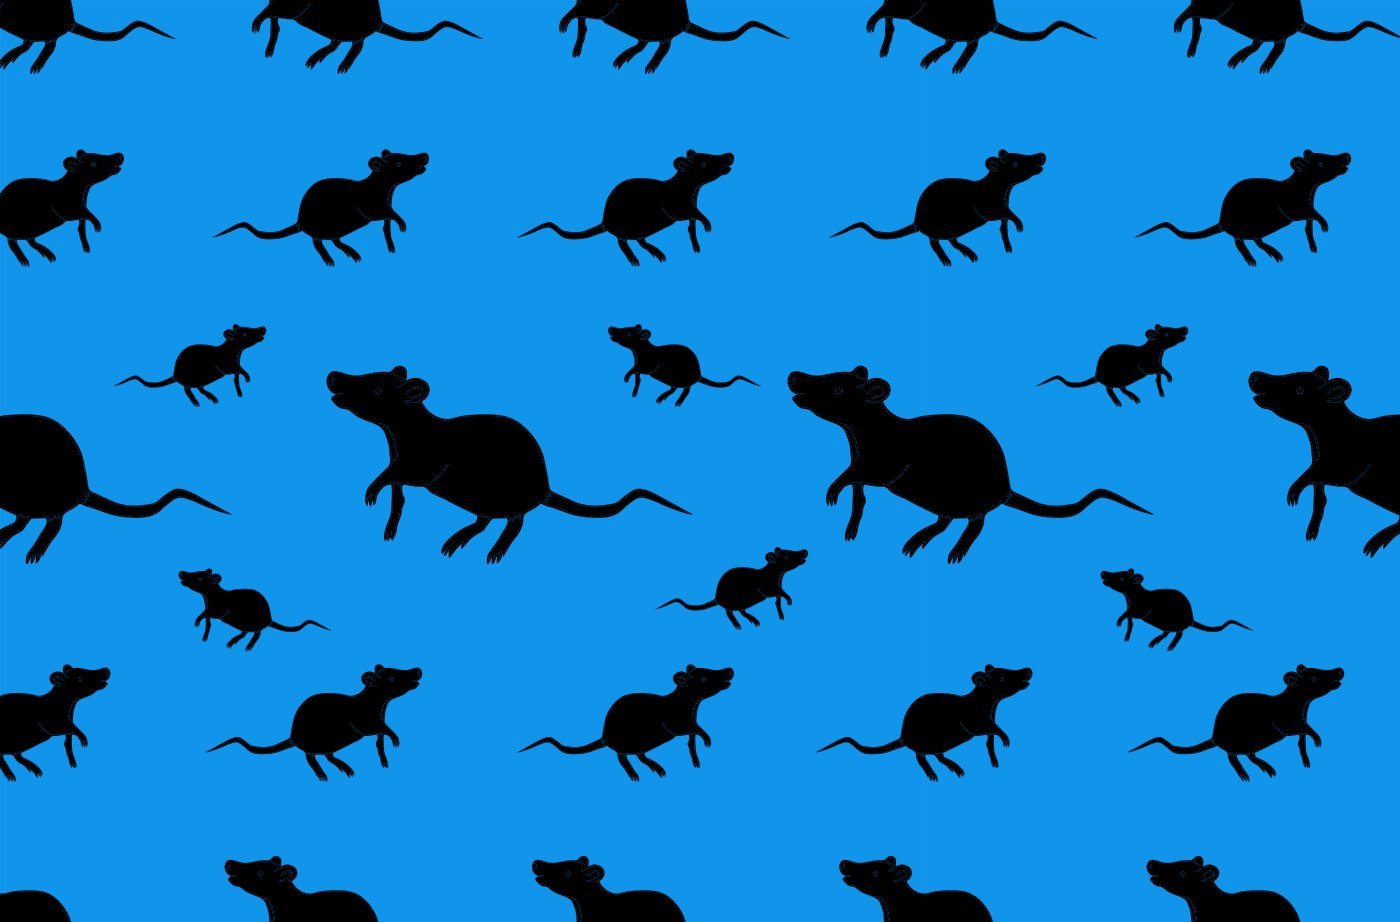 simple solid black colored pattern of rats on a blue background